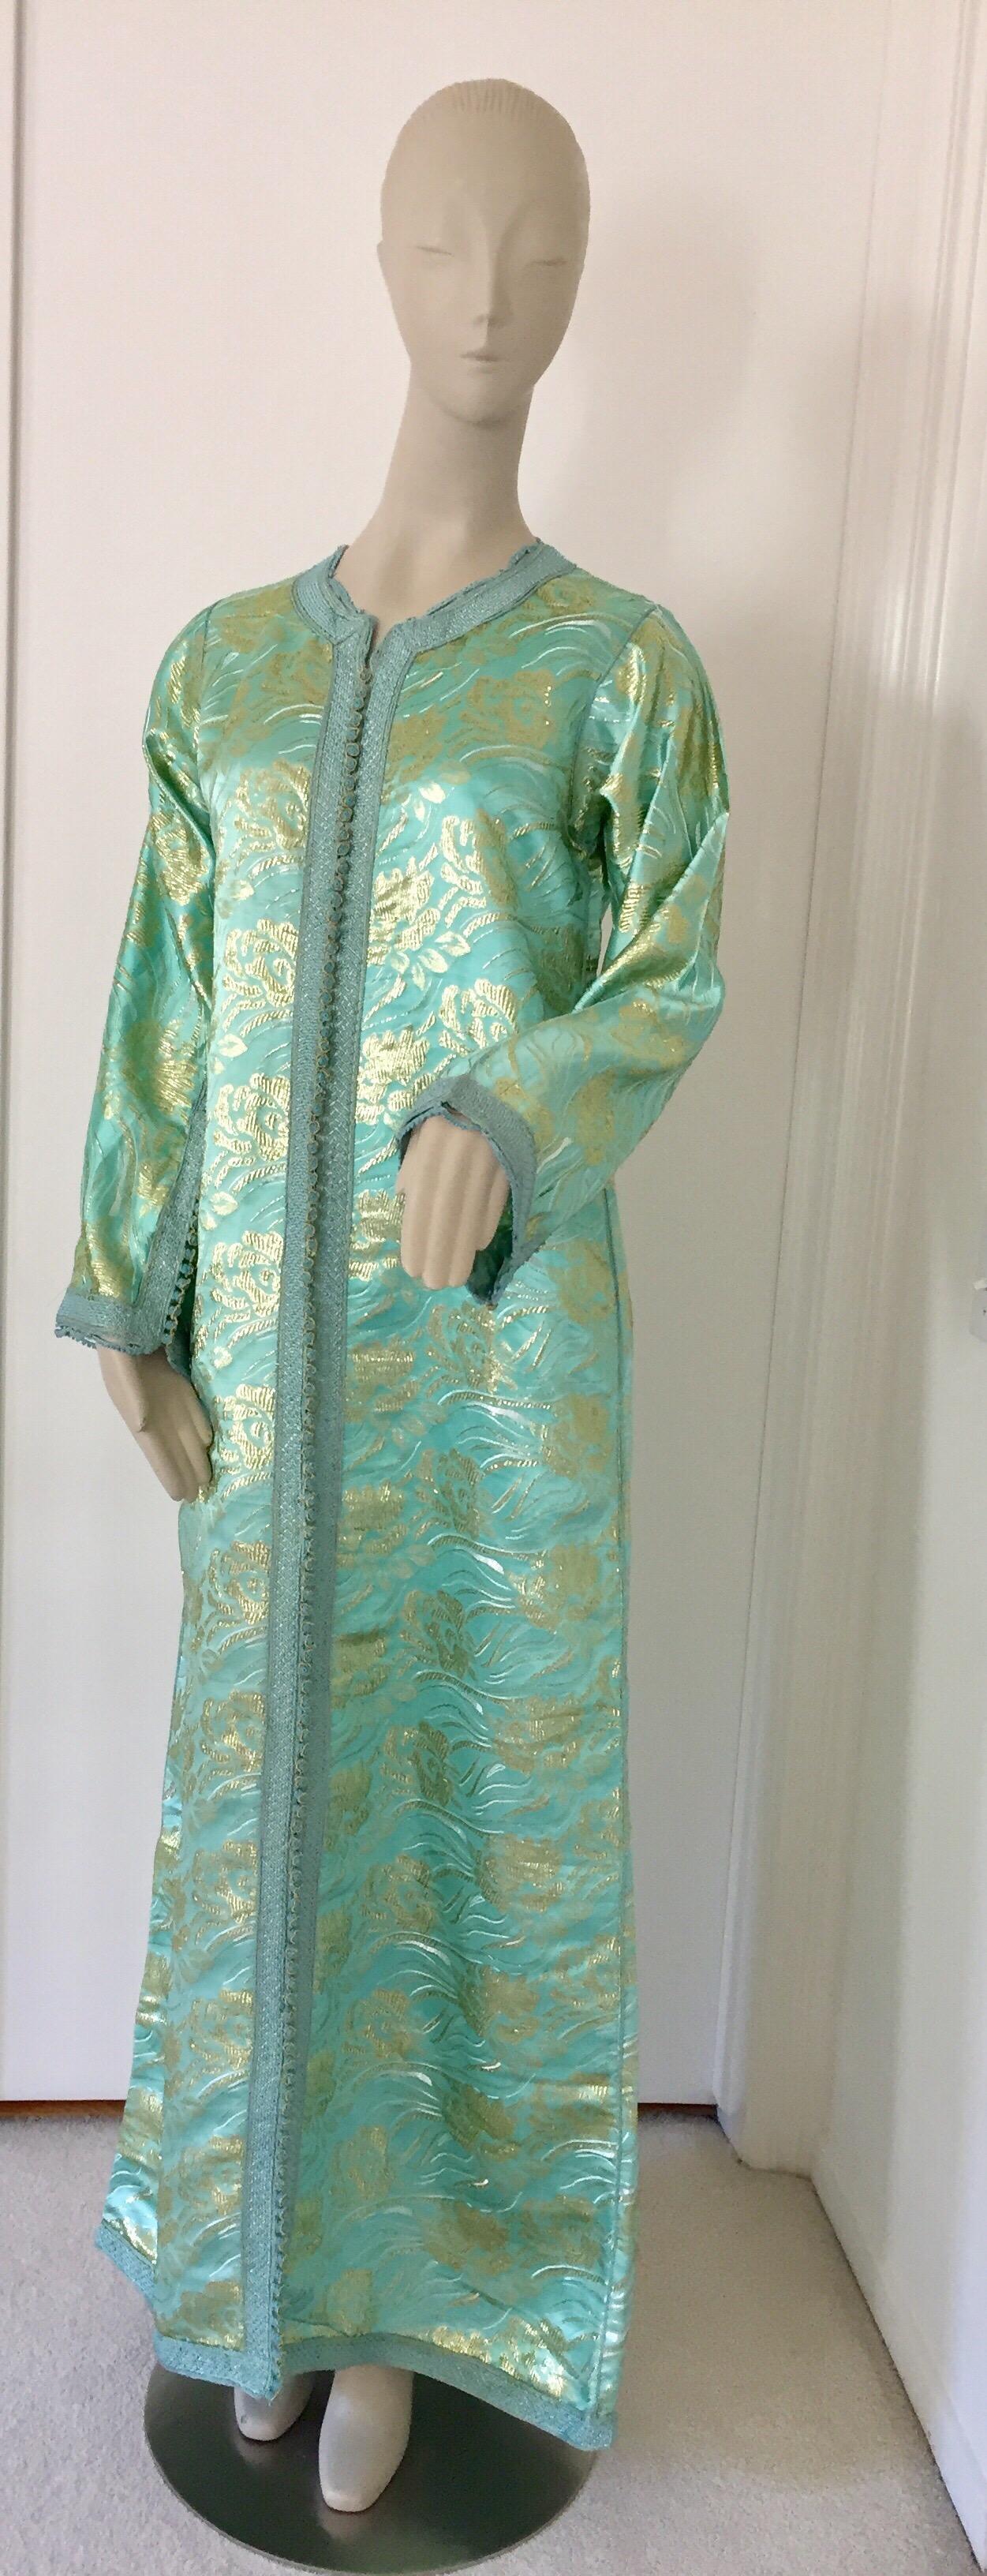 Moroccan Vintage Kaftan in Turquoise and Gold Floral Brocade Metallic Lame - 1 In Good Condition For Sale In North Hollywood, CA